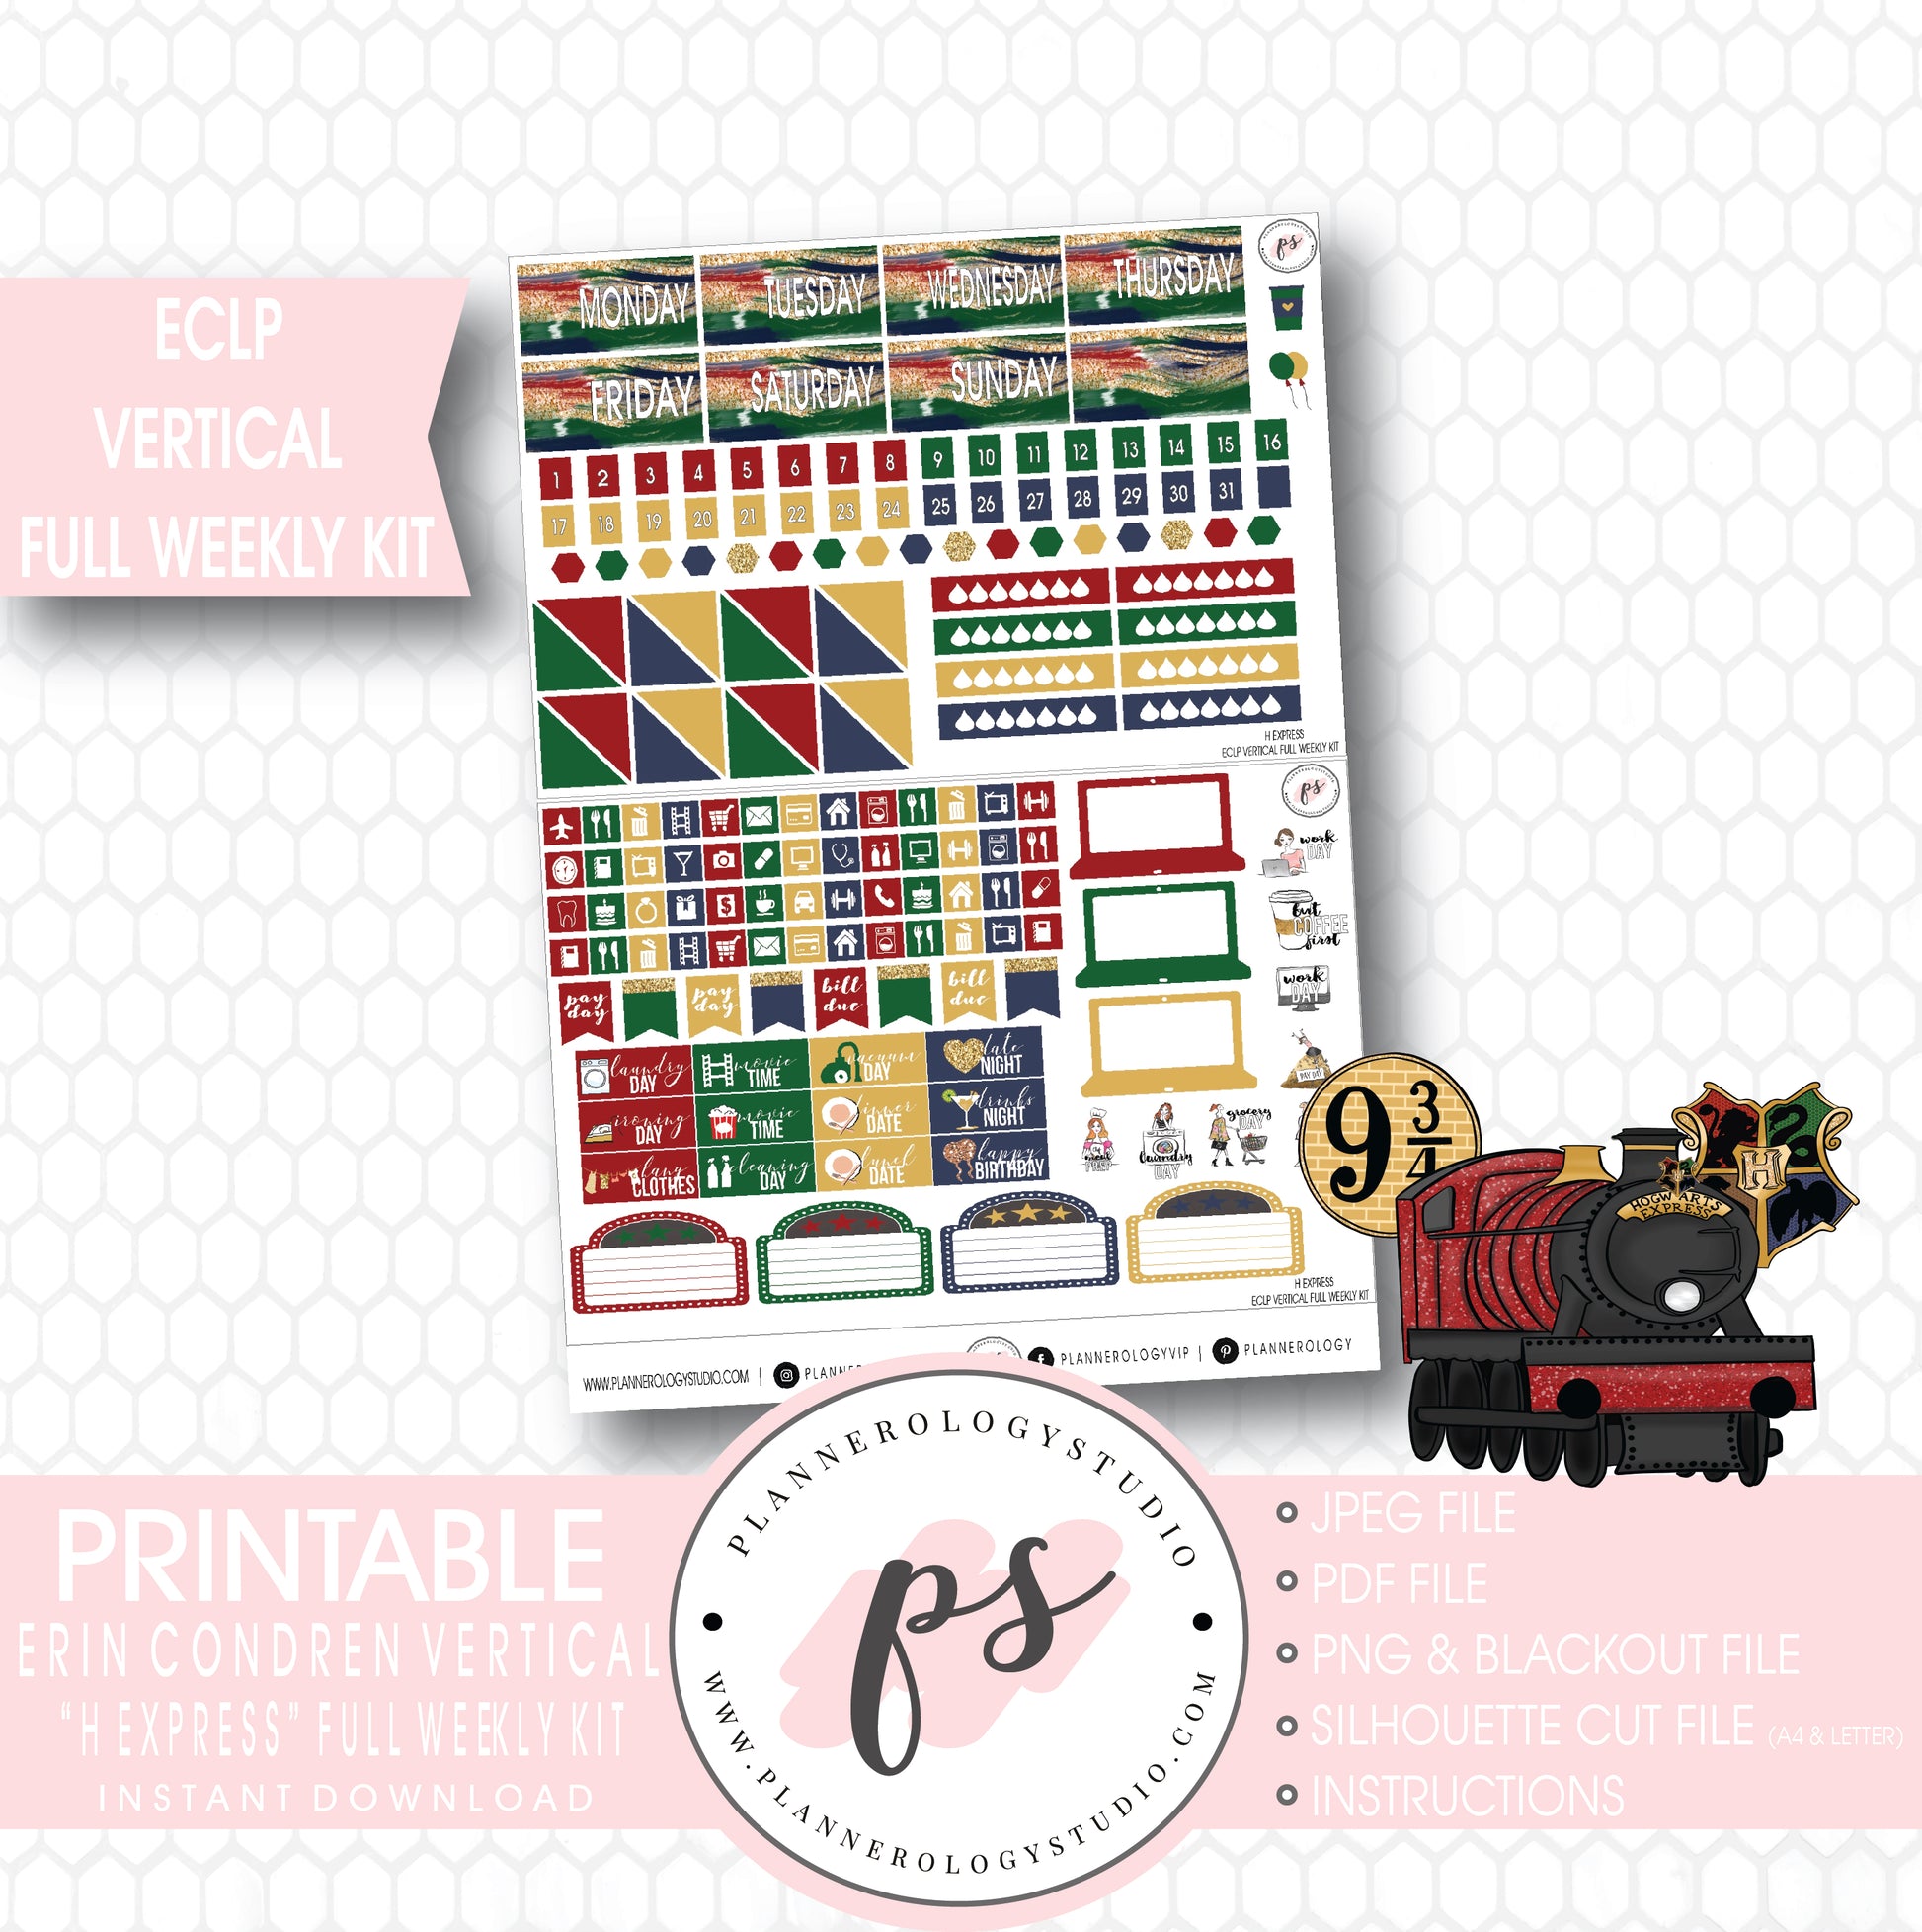 H Express (Harry Potter) Full Weekly Kit Printable Planner Stickers (for use with ECLP Vertical) - Plannerologystudio